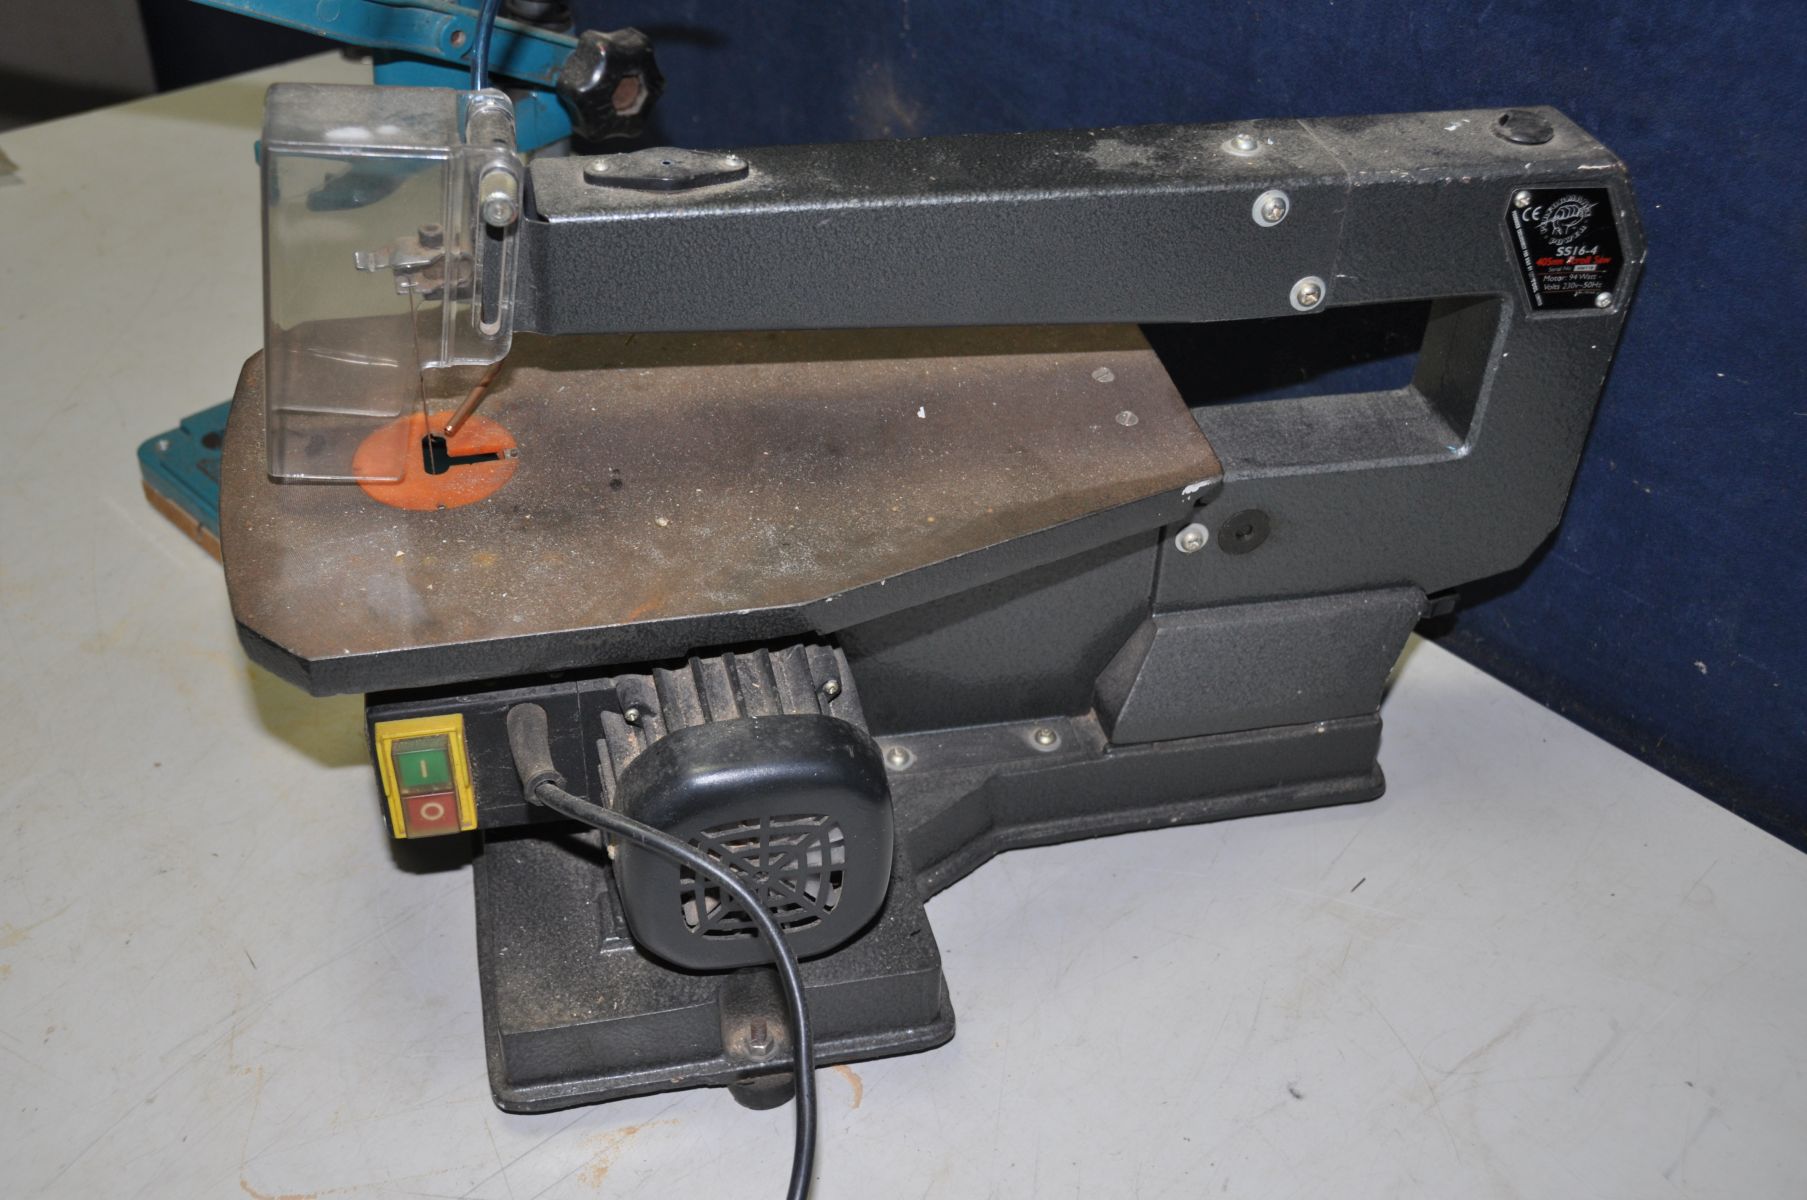 A PERFORMANCE POWER SS16-4 ELECTRIC SCROLL SAW (PAT pass and working - breather pipe broken) and a - Image 3 of 3